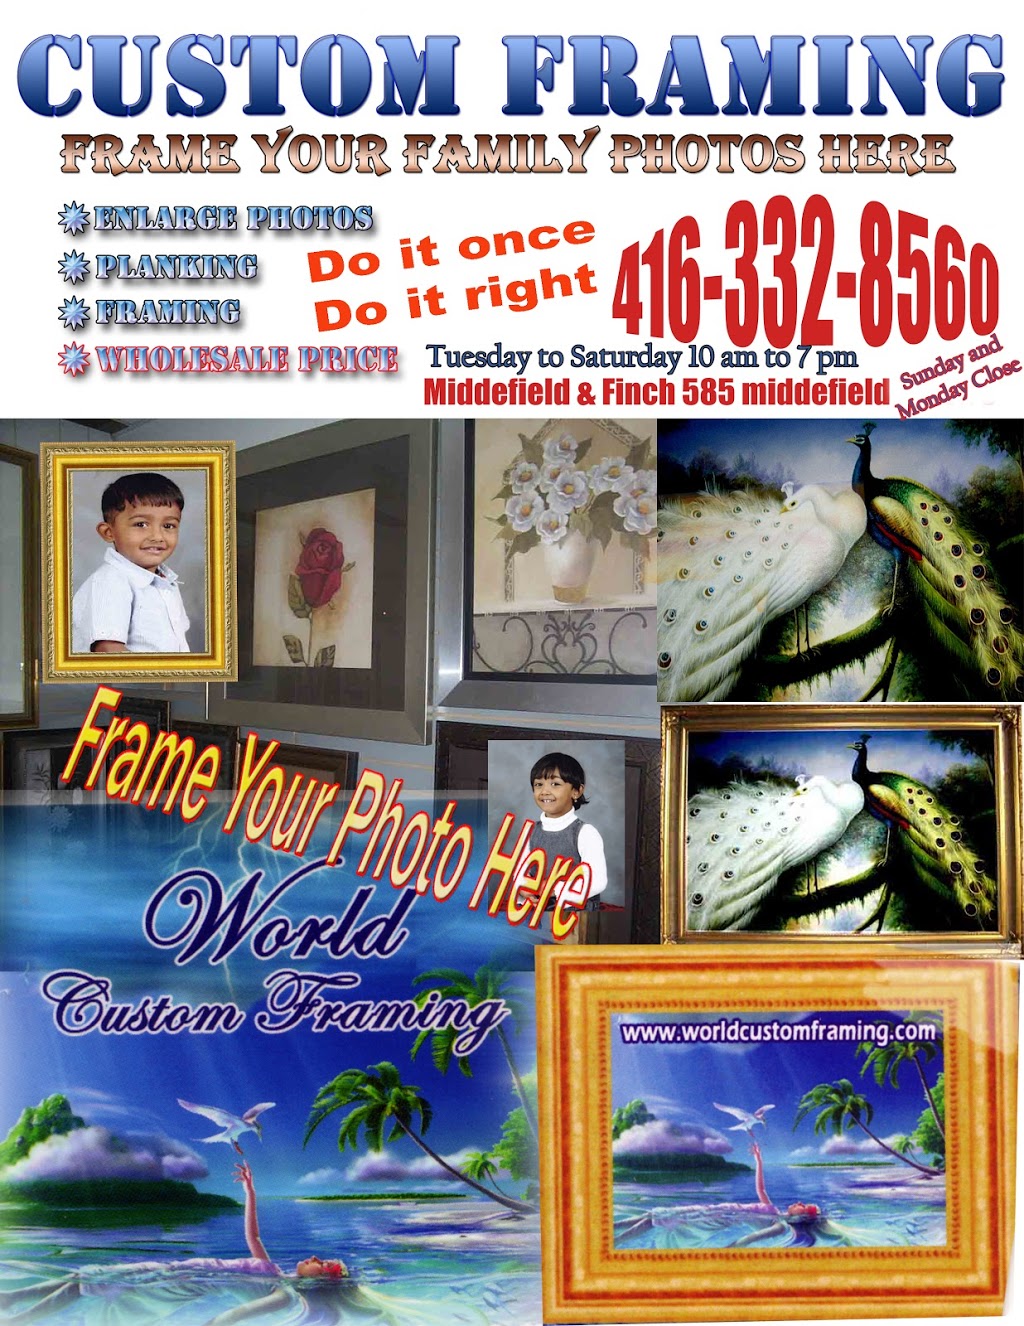 W H Decor Frame | furniture store | 585 Middlefield Rd, Scarborough, ON M1V 4Y5, Canada | 4163328560 OR +1 416-332-8560